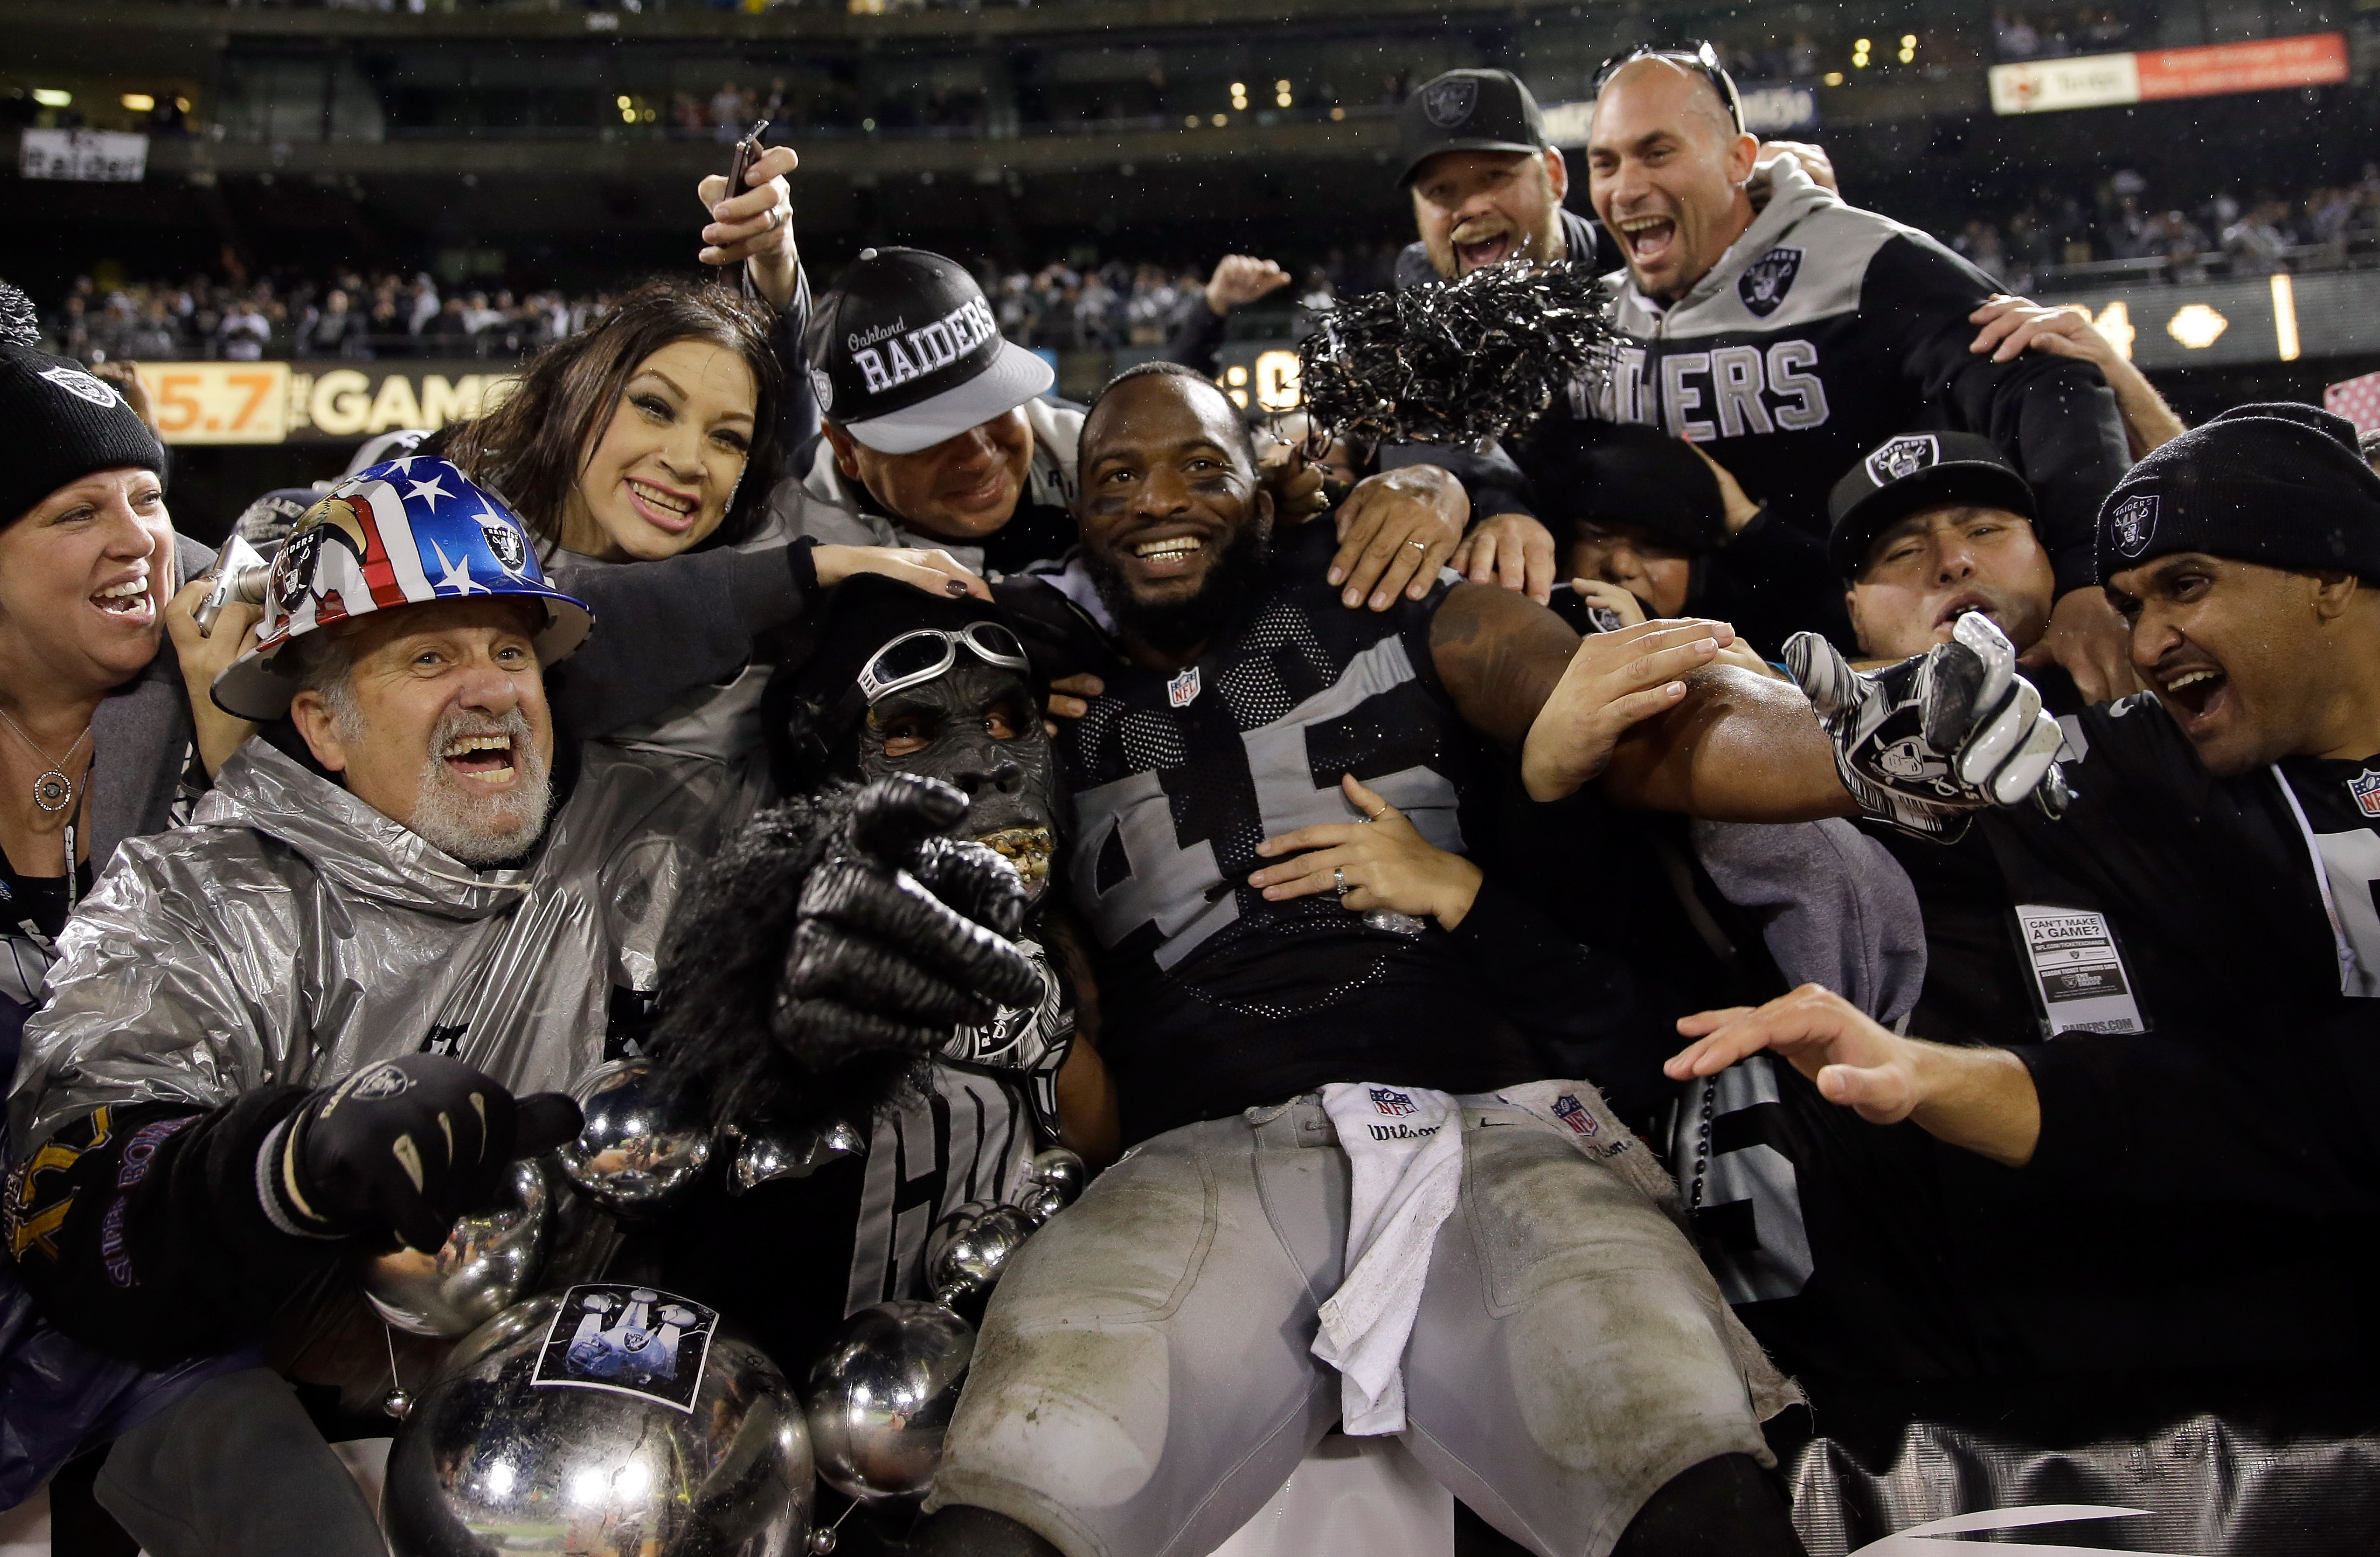 Marcel Reece #45 of the Oakland Raiders celebrates with fans in the Black Hole after the Raiders beat the Kansas City Chiefs at O.co Coliseum on November 20, 2014 in Oakland, California. (Ezra Shaw&mdash;Getty Images)